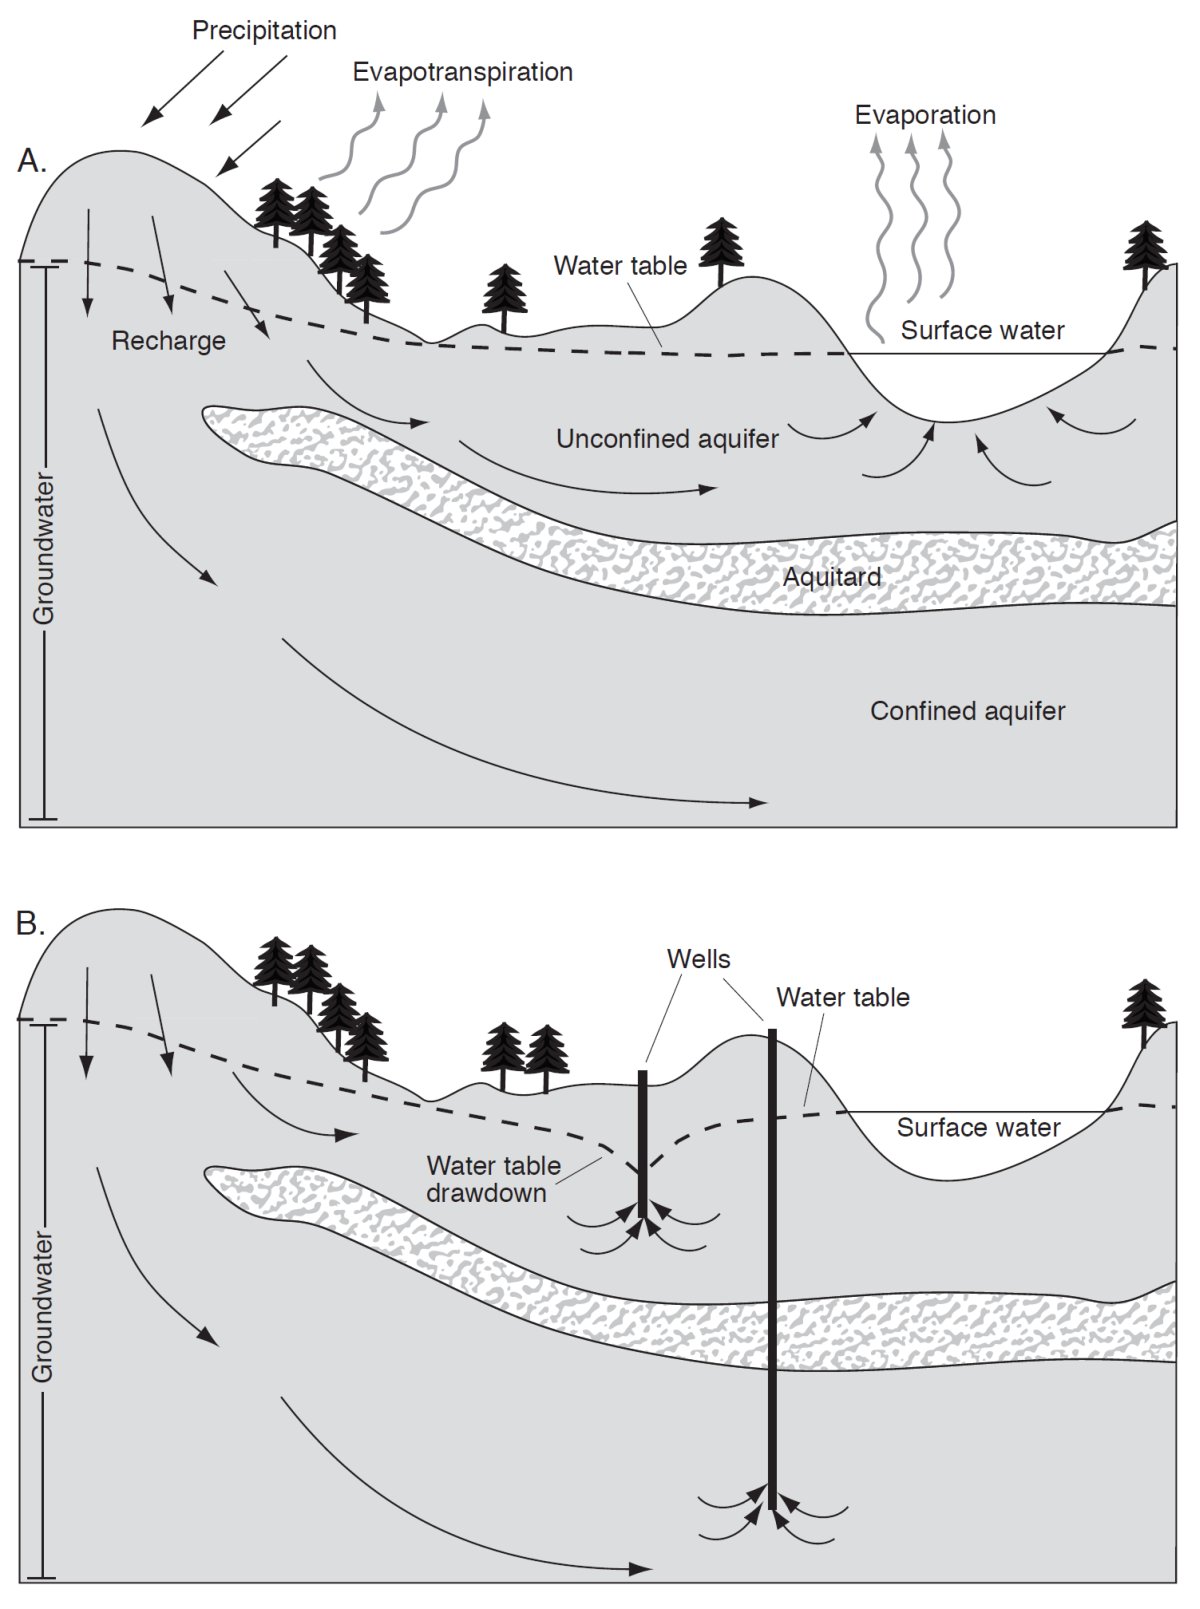 Diagrams showing groundwater systems. Arrows represent the direction of groundwater flow.